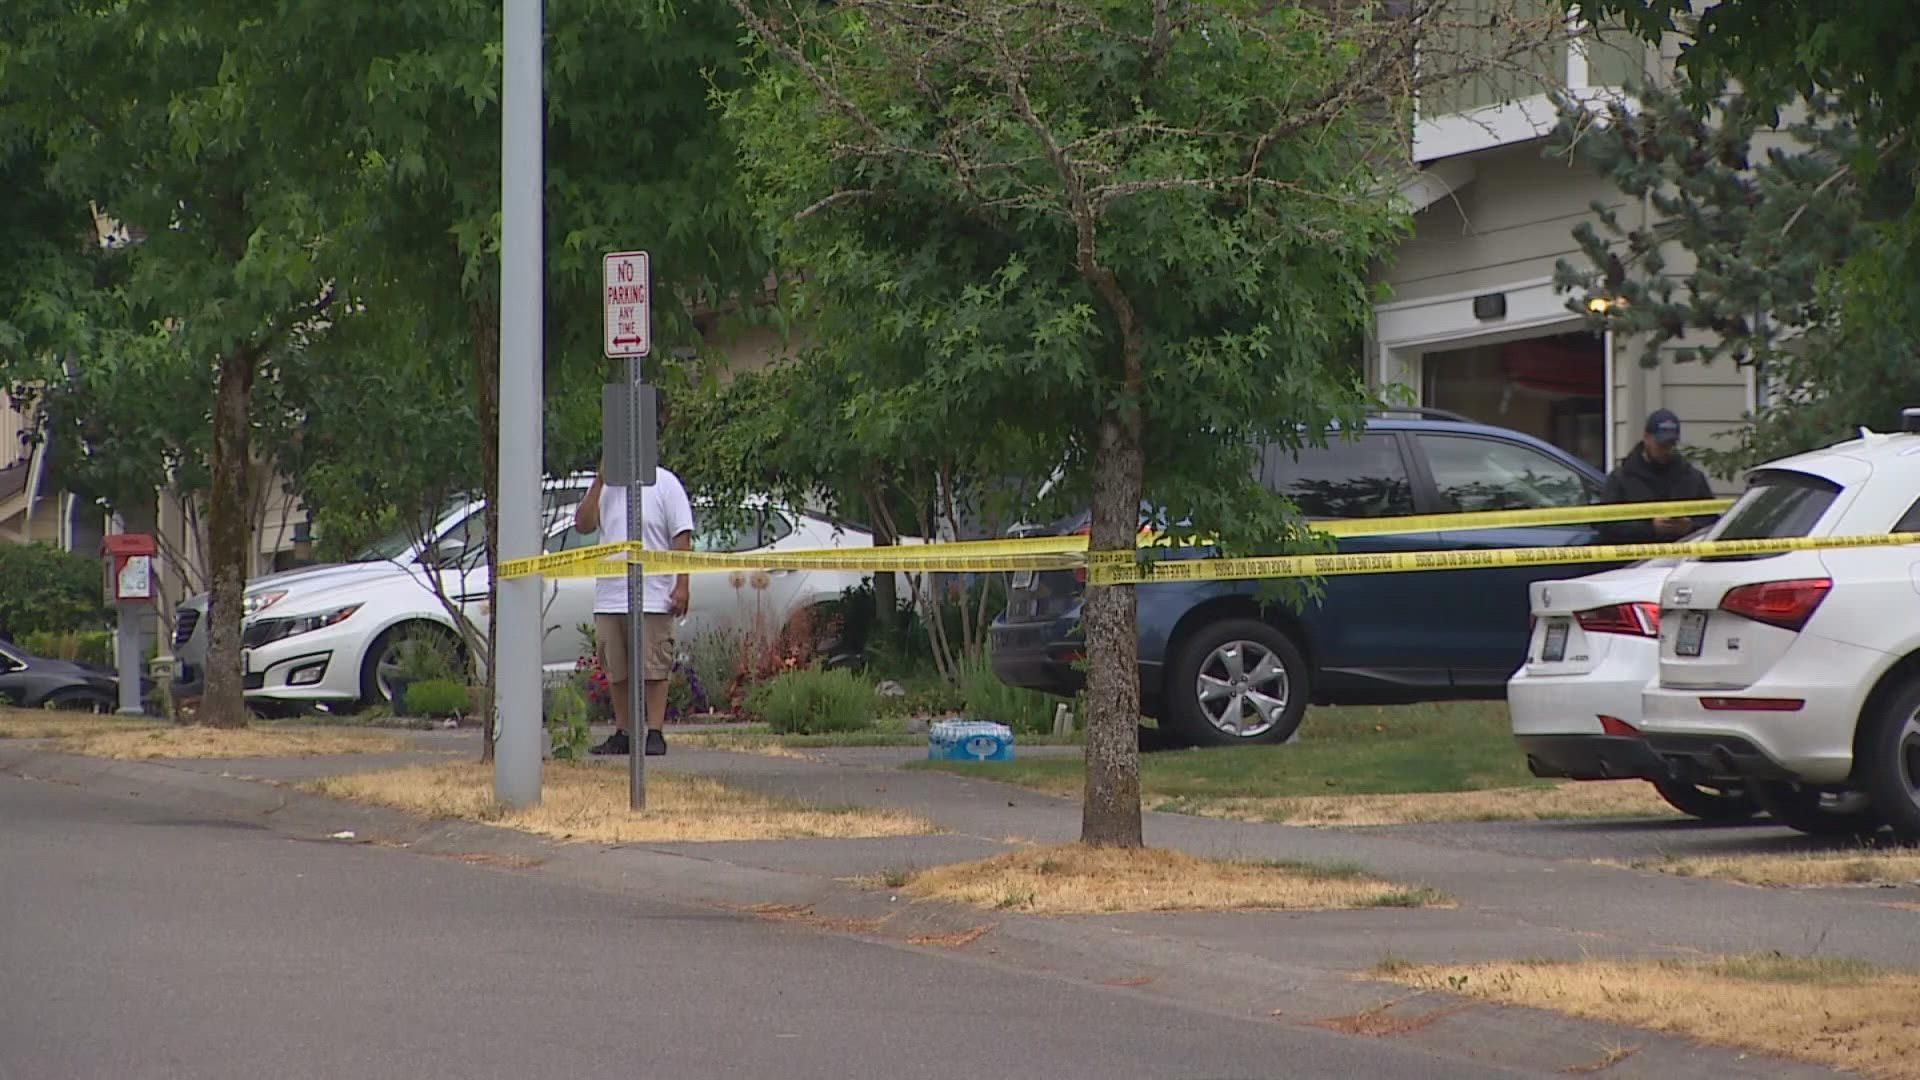 A woman in her 30s was shot and killed during a home invasion in a residential area of Snohomish County early Friday.